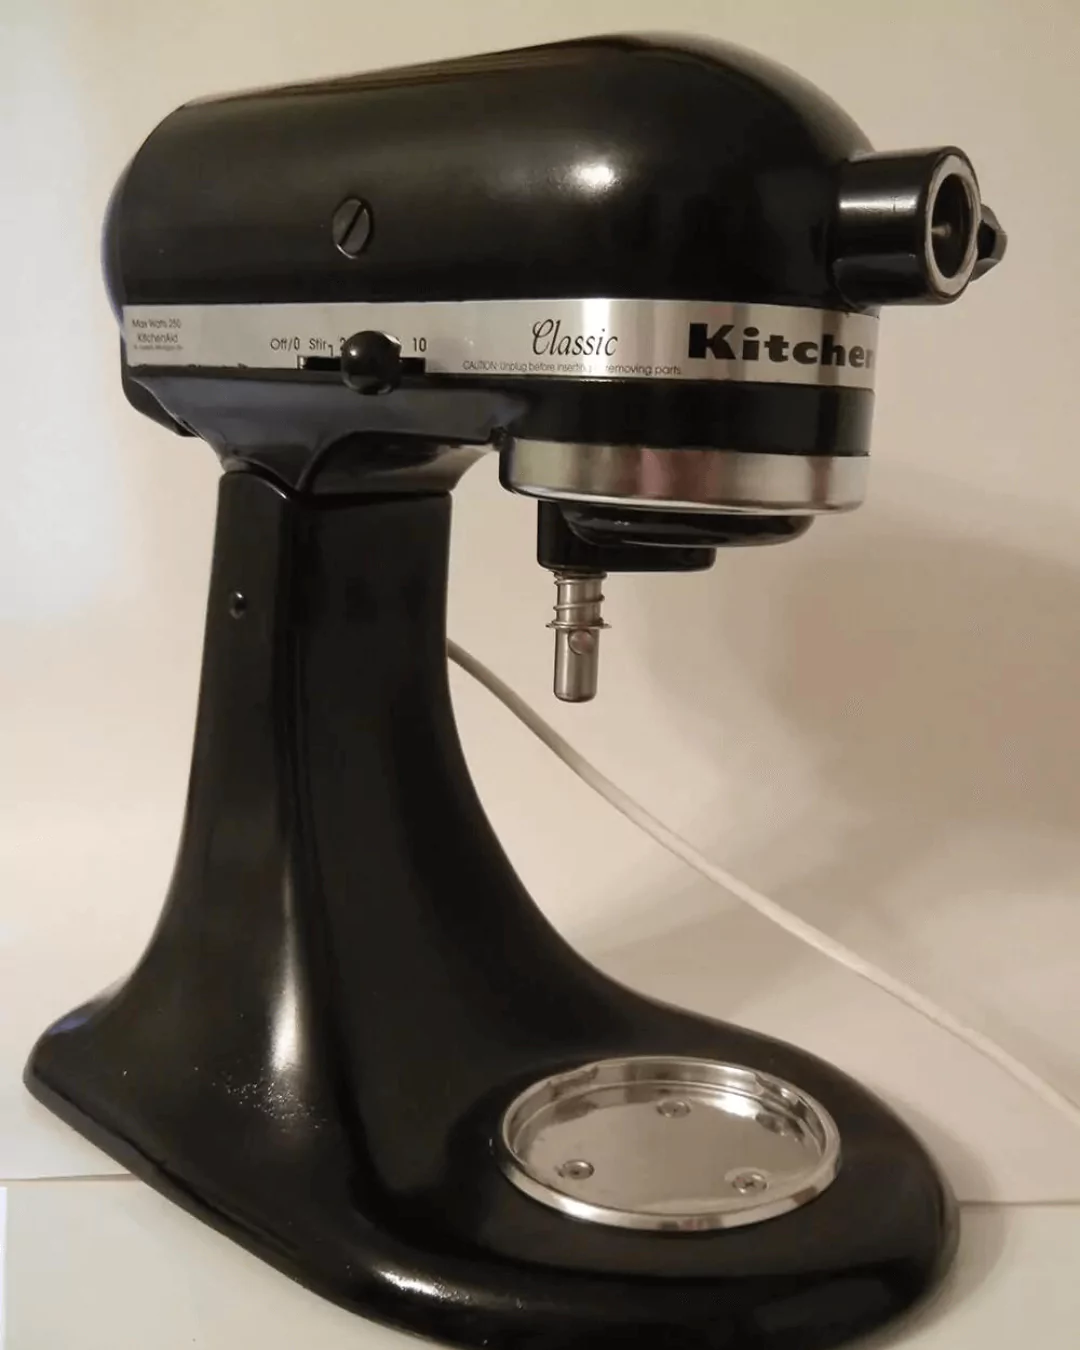 How to Spray Paint a KitchenAid Stand Mixer